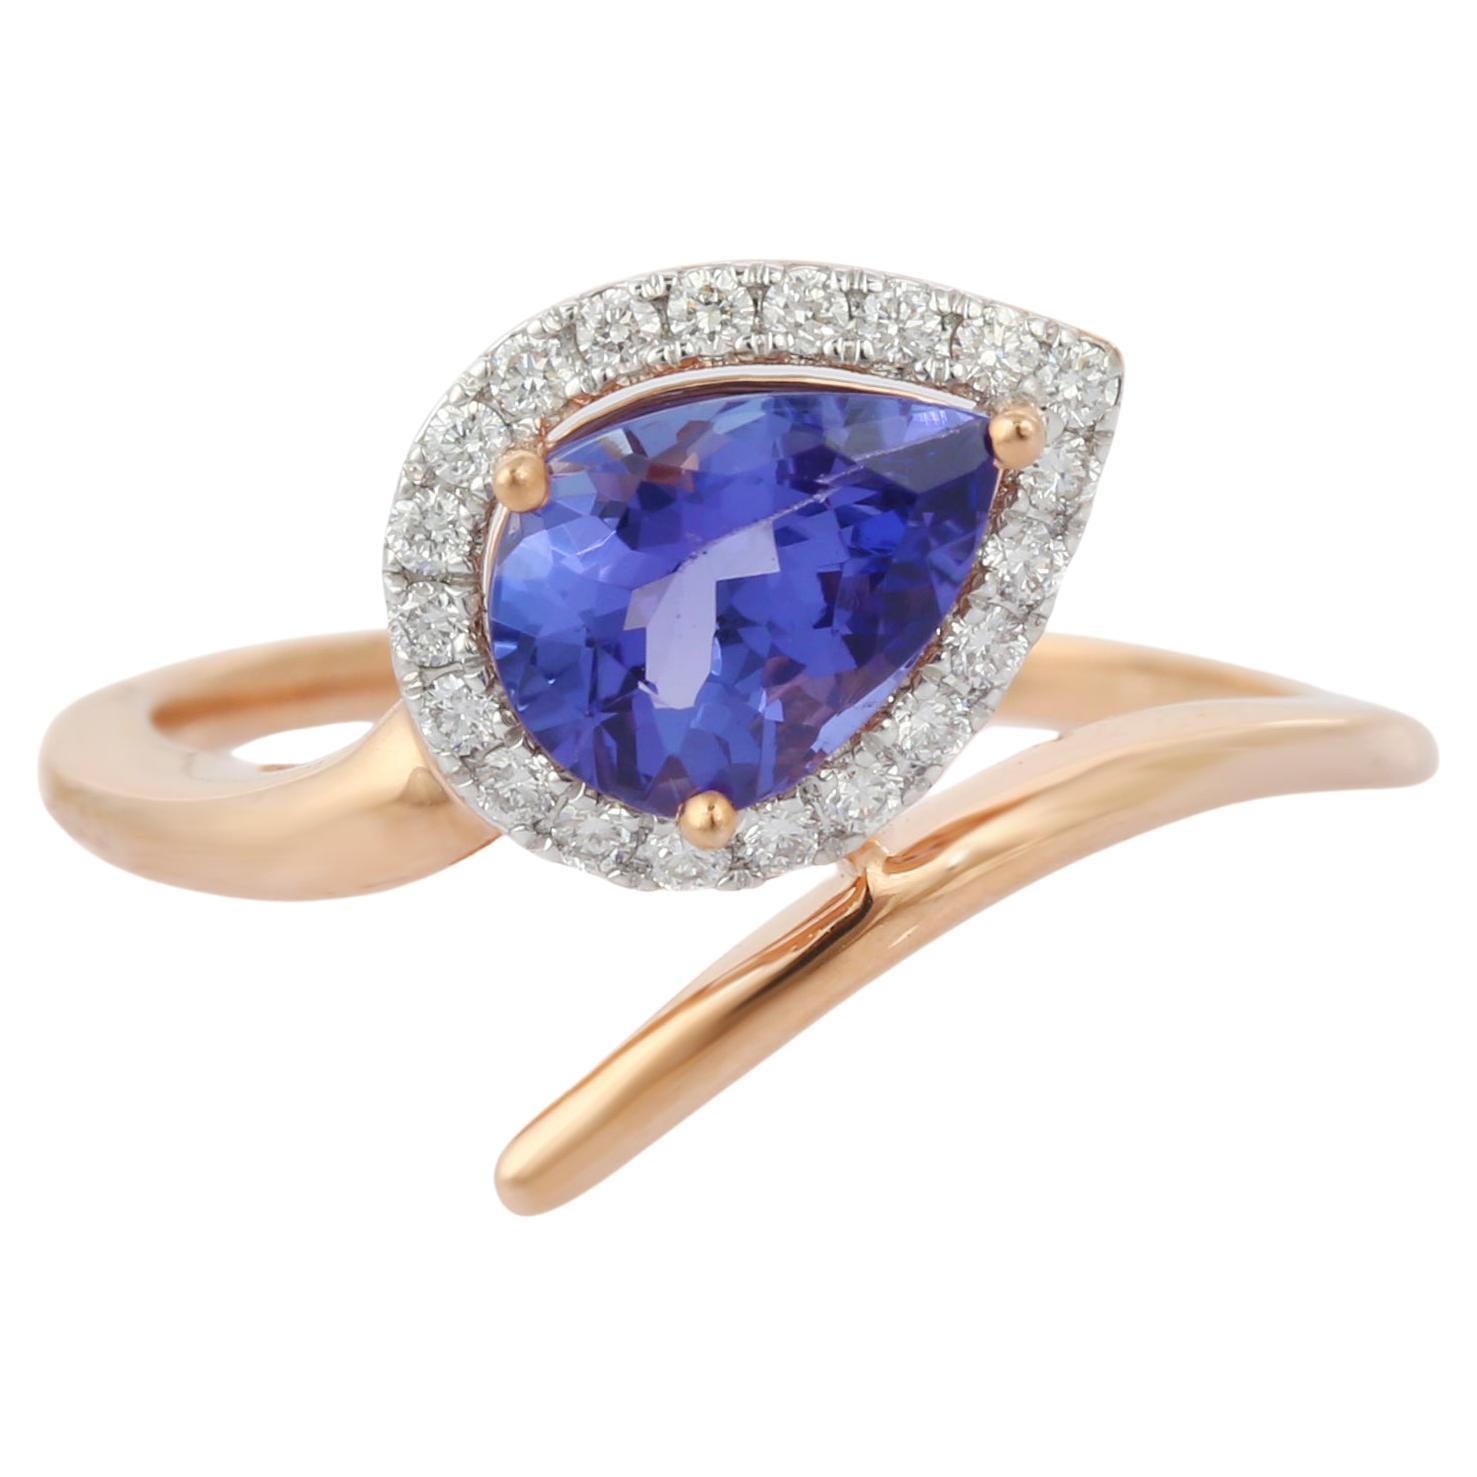 For Sale:  18K Rose Gold Pear Shape Tanzanite and Diamond Ring